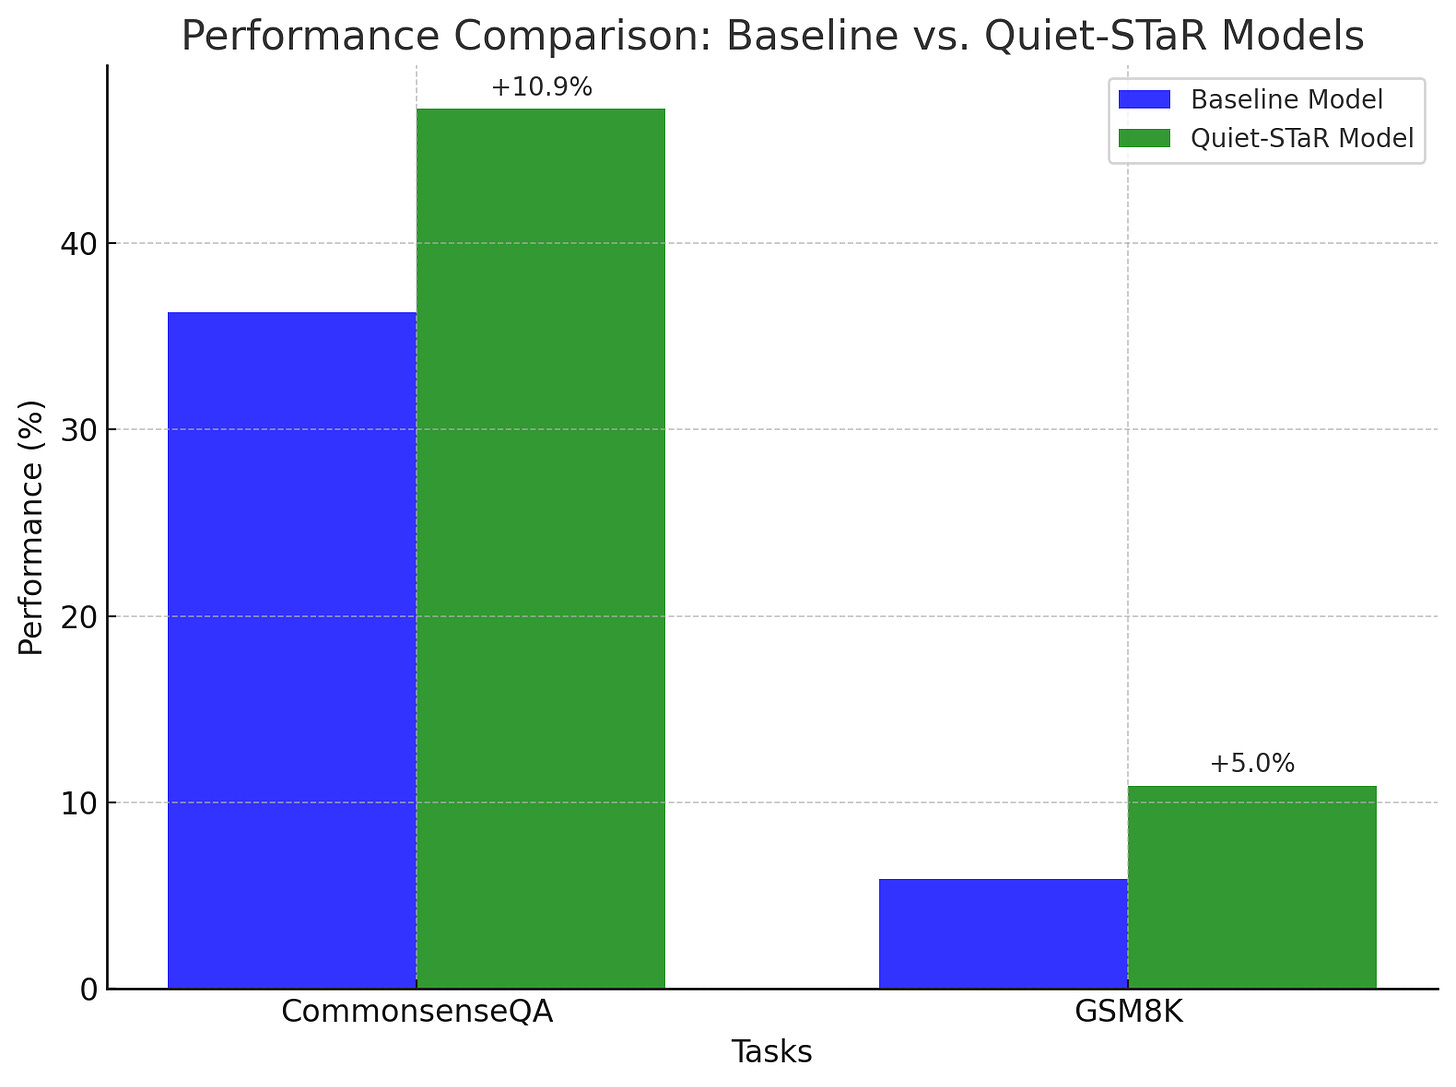 A bar graph comparing the performance between Baseline and Quiet-STaR Models on CommonsenseQA and GSM8K tasks, indicating significant improvements with Quiet-STaR.